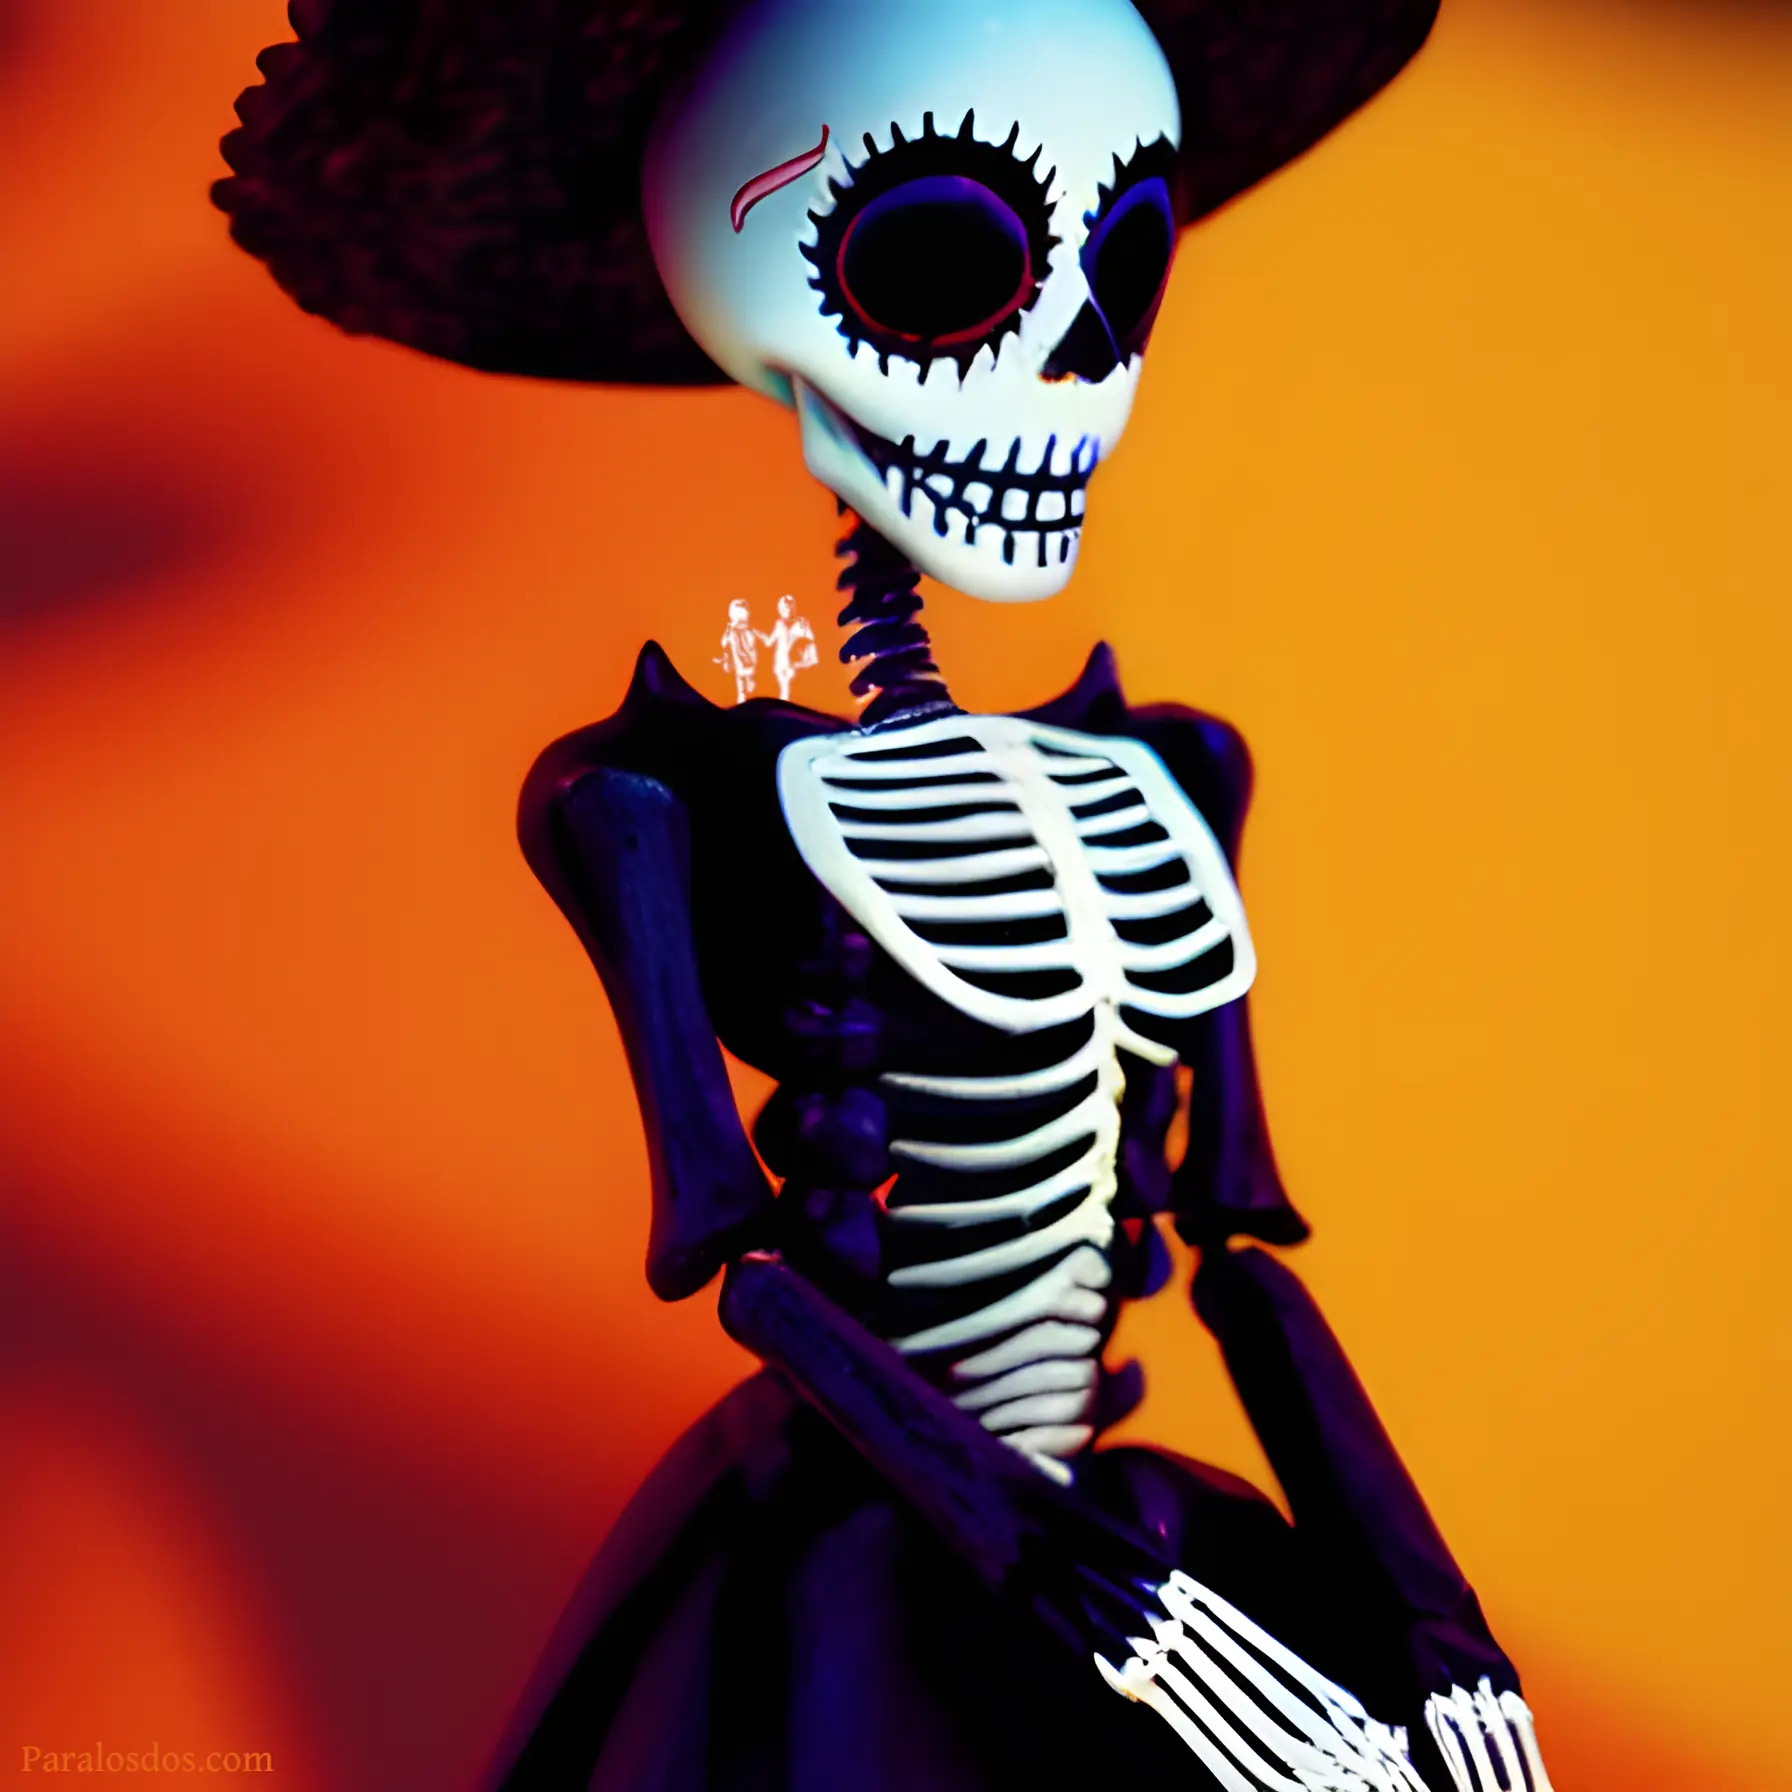 An artistic rendering of a Mexican Catrina skeleton.